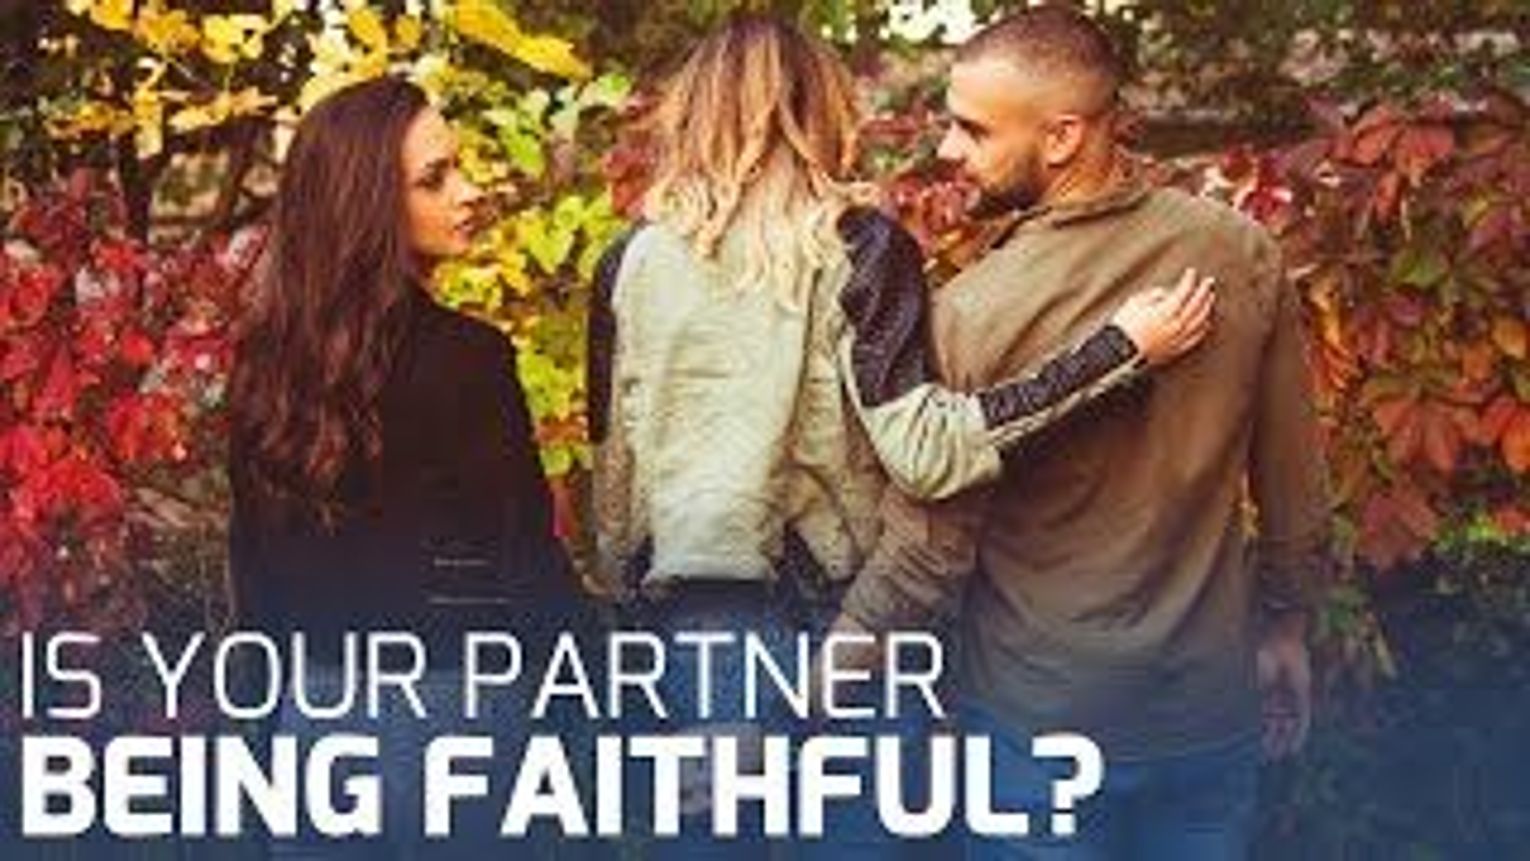 How to Know If Your Partner Is Being Faithful